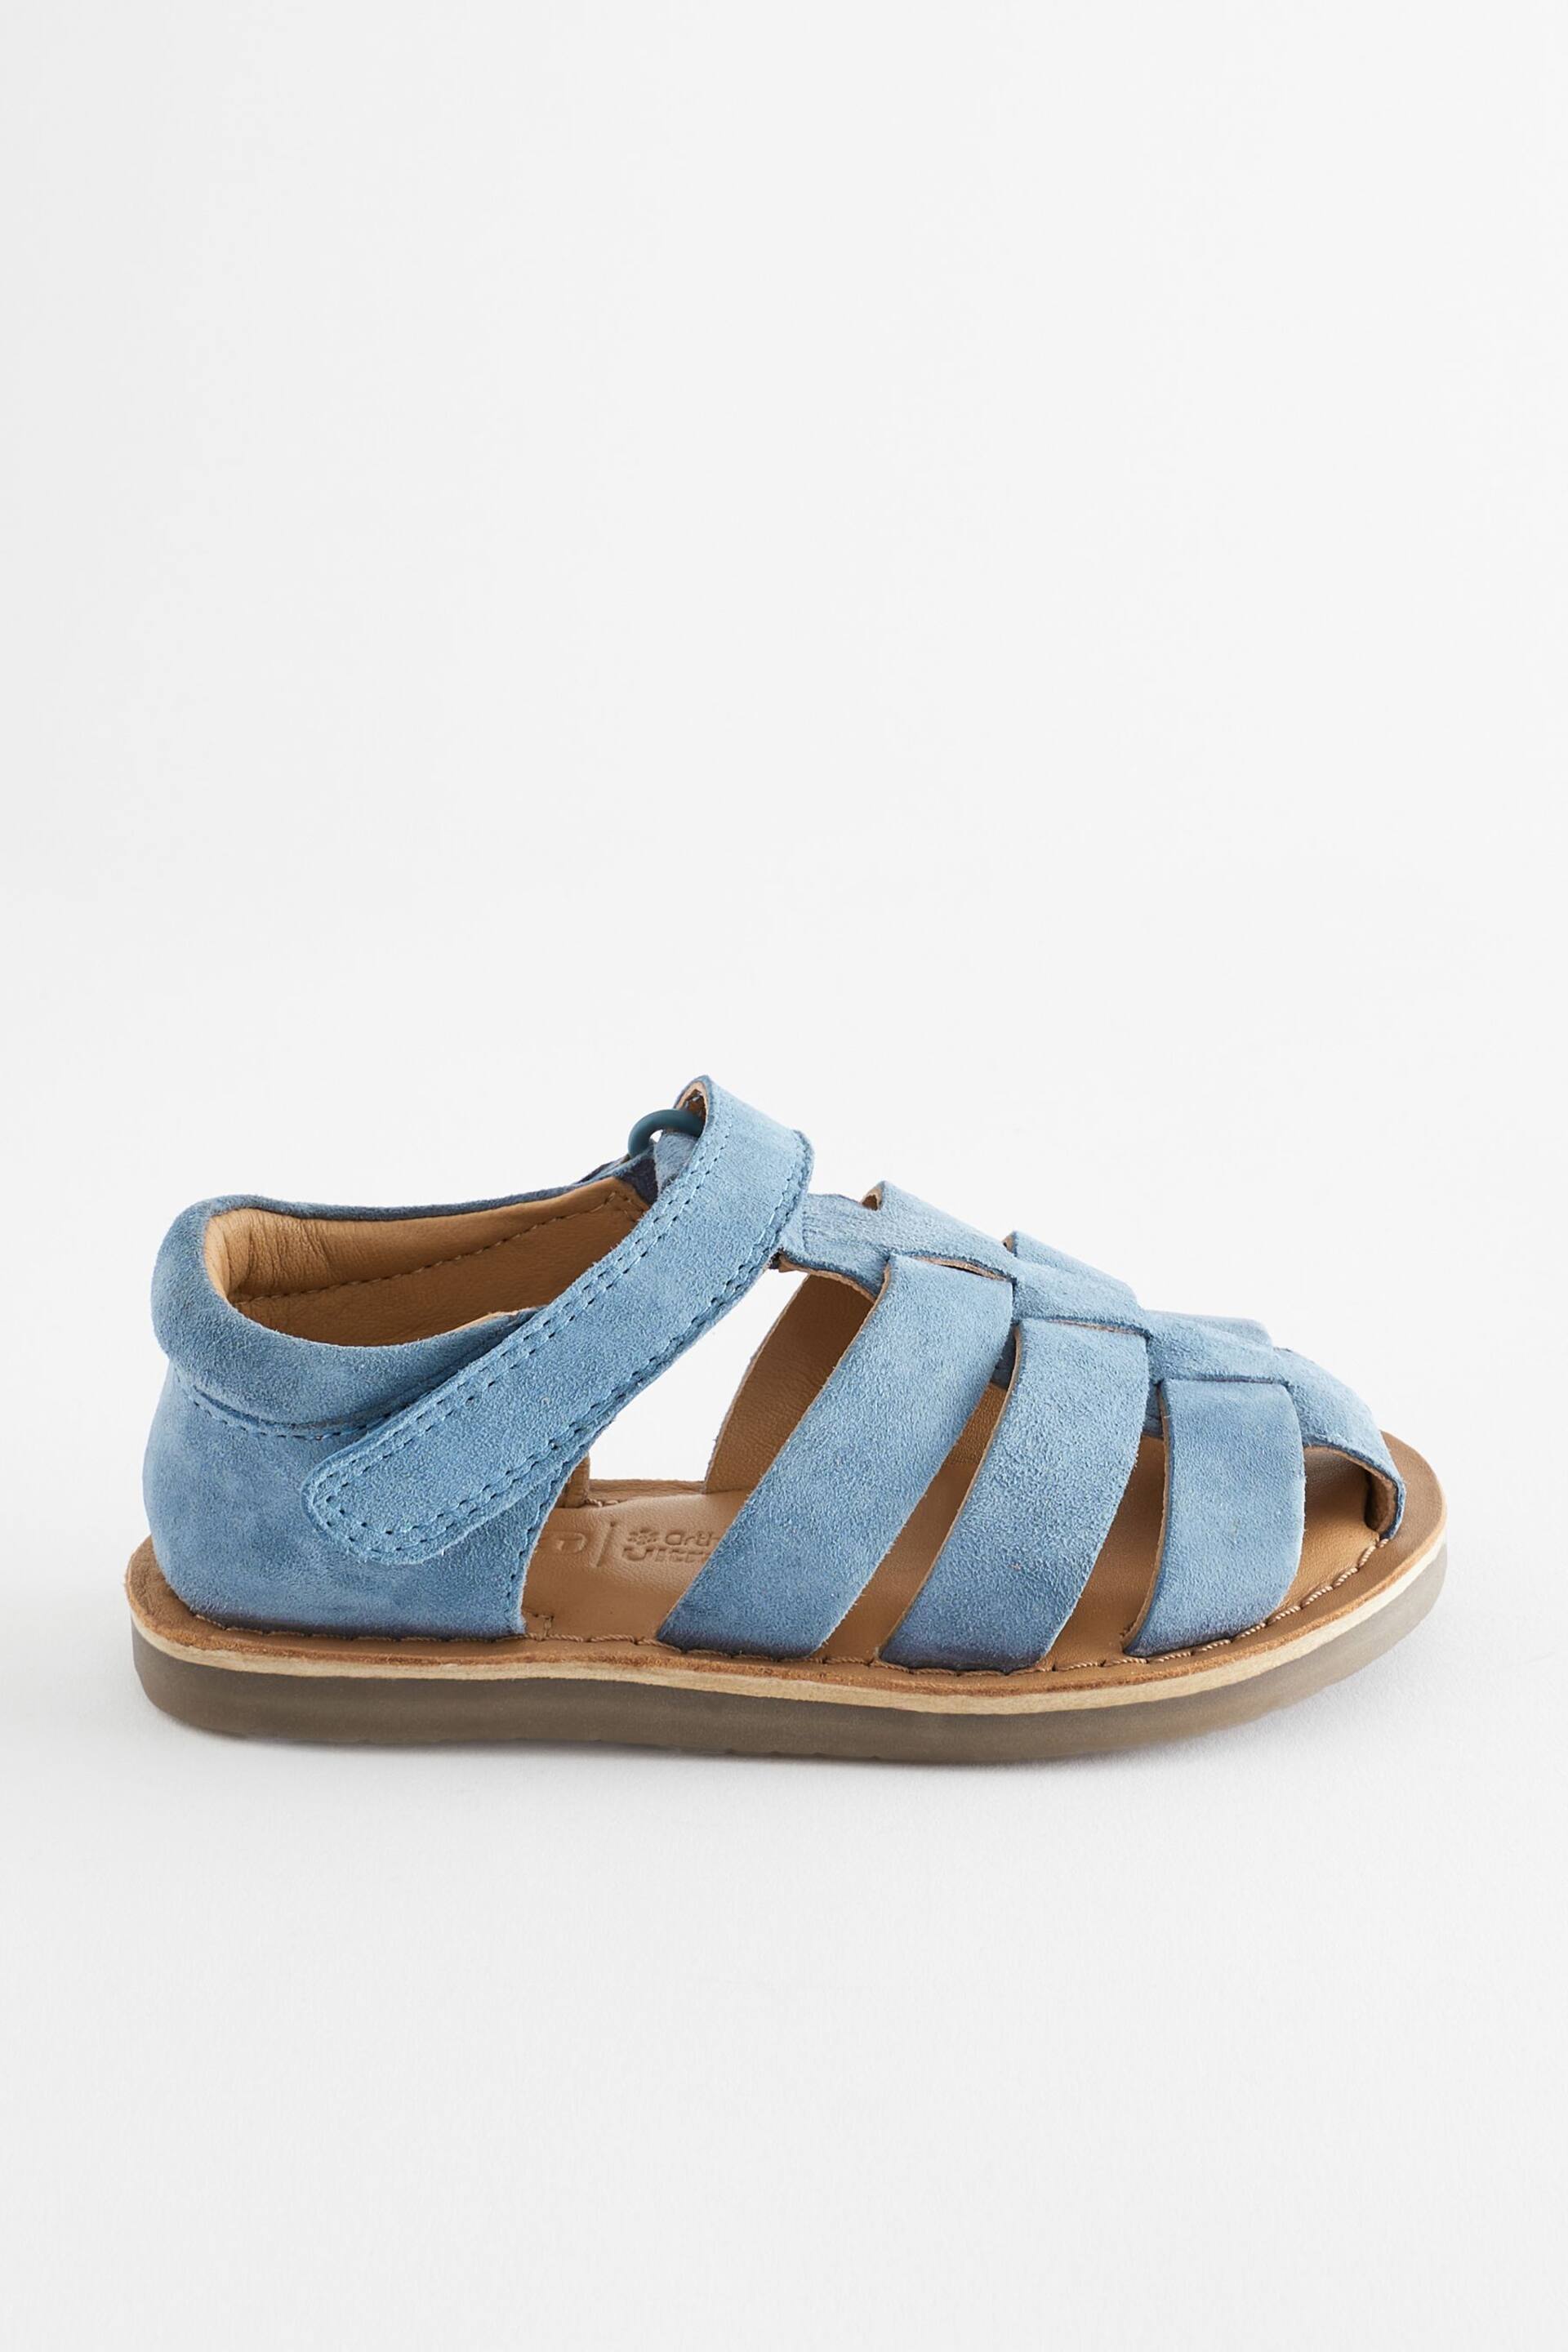 Blue Leather Closed Toe Touch Fastening Sandals - Image 2 of 7